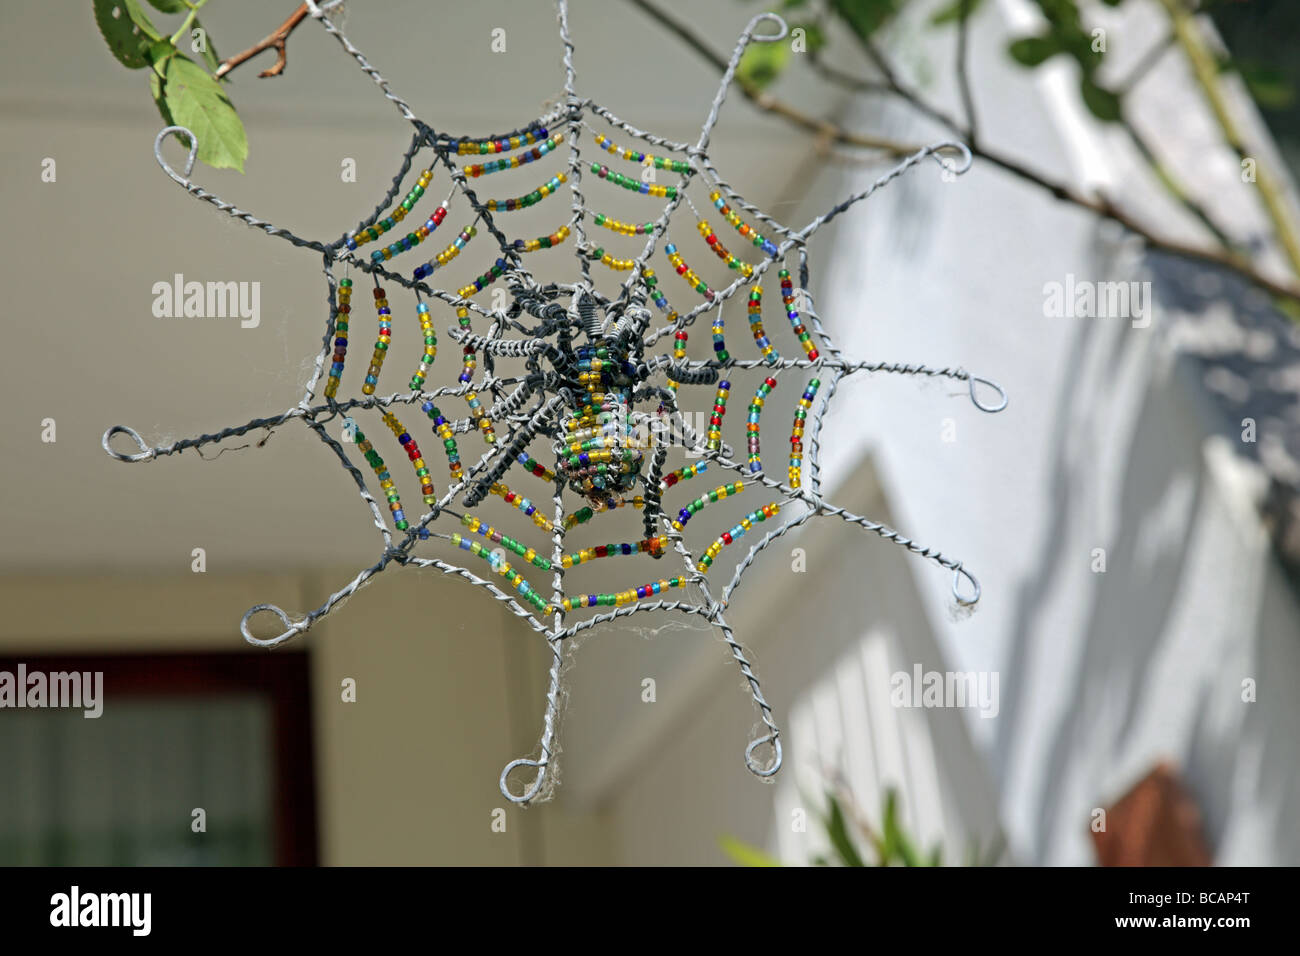 articial spider and net made of beads Zulu art South Africa Stock Photo